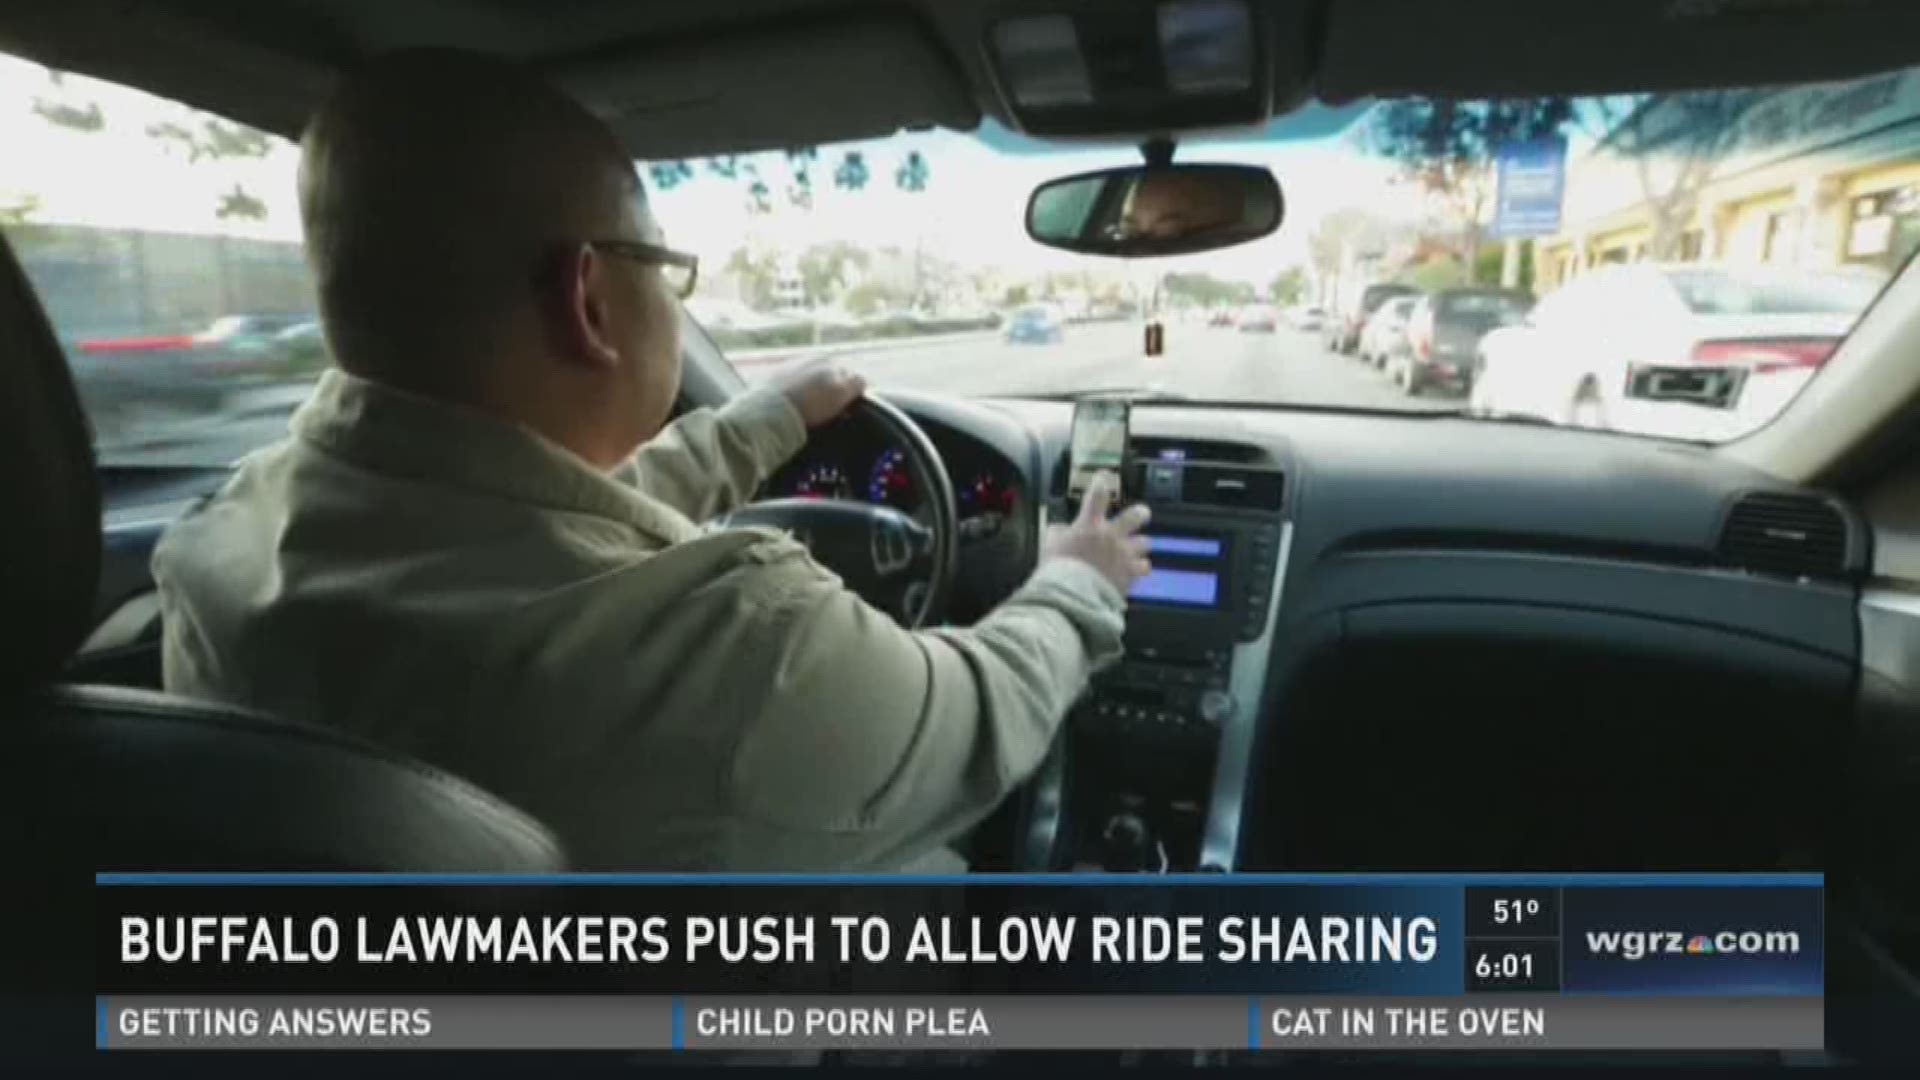 Buffalo Lawmakers Push To Allow Ride Sharing